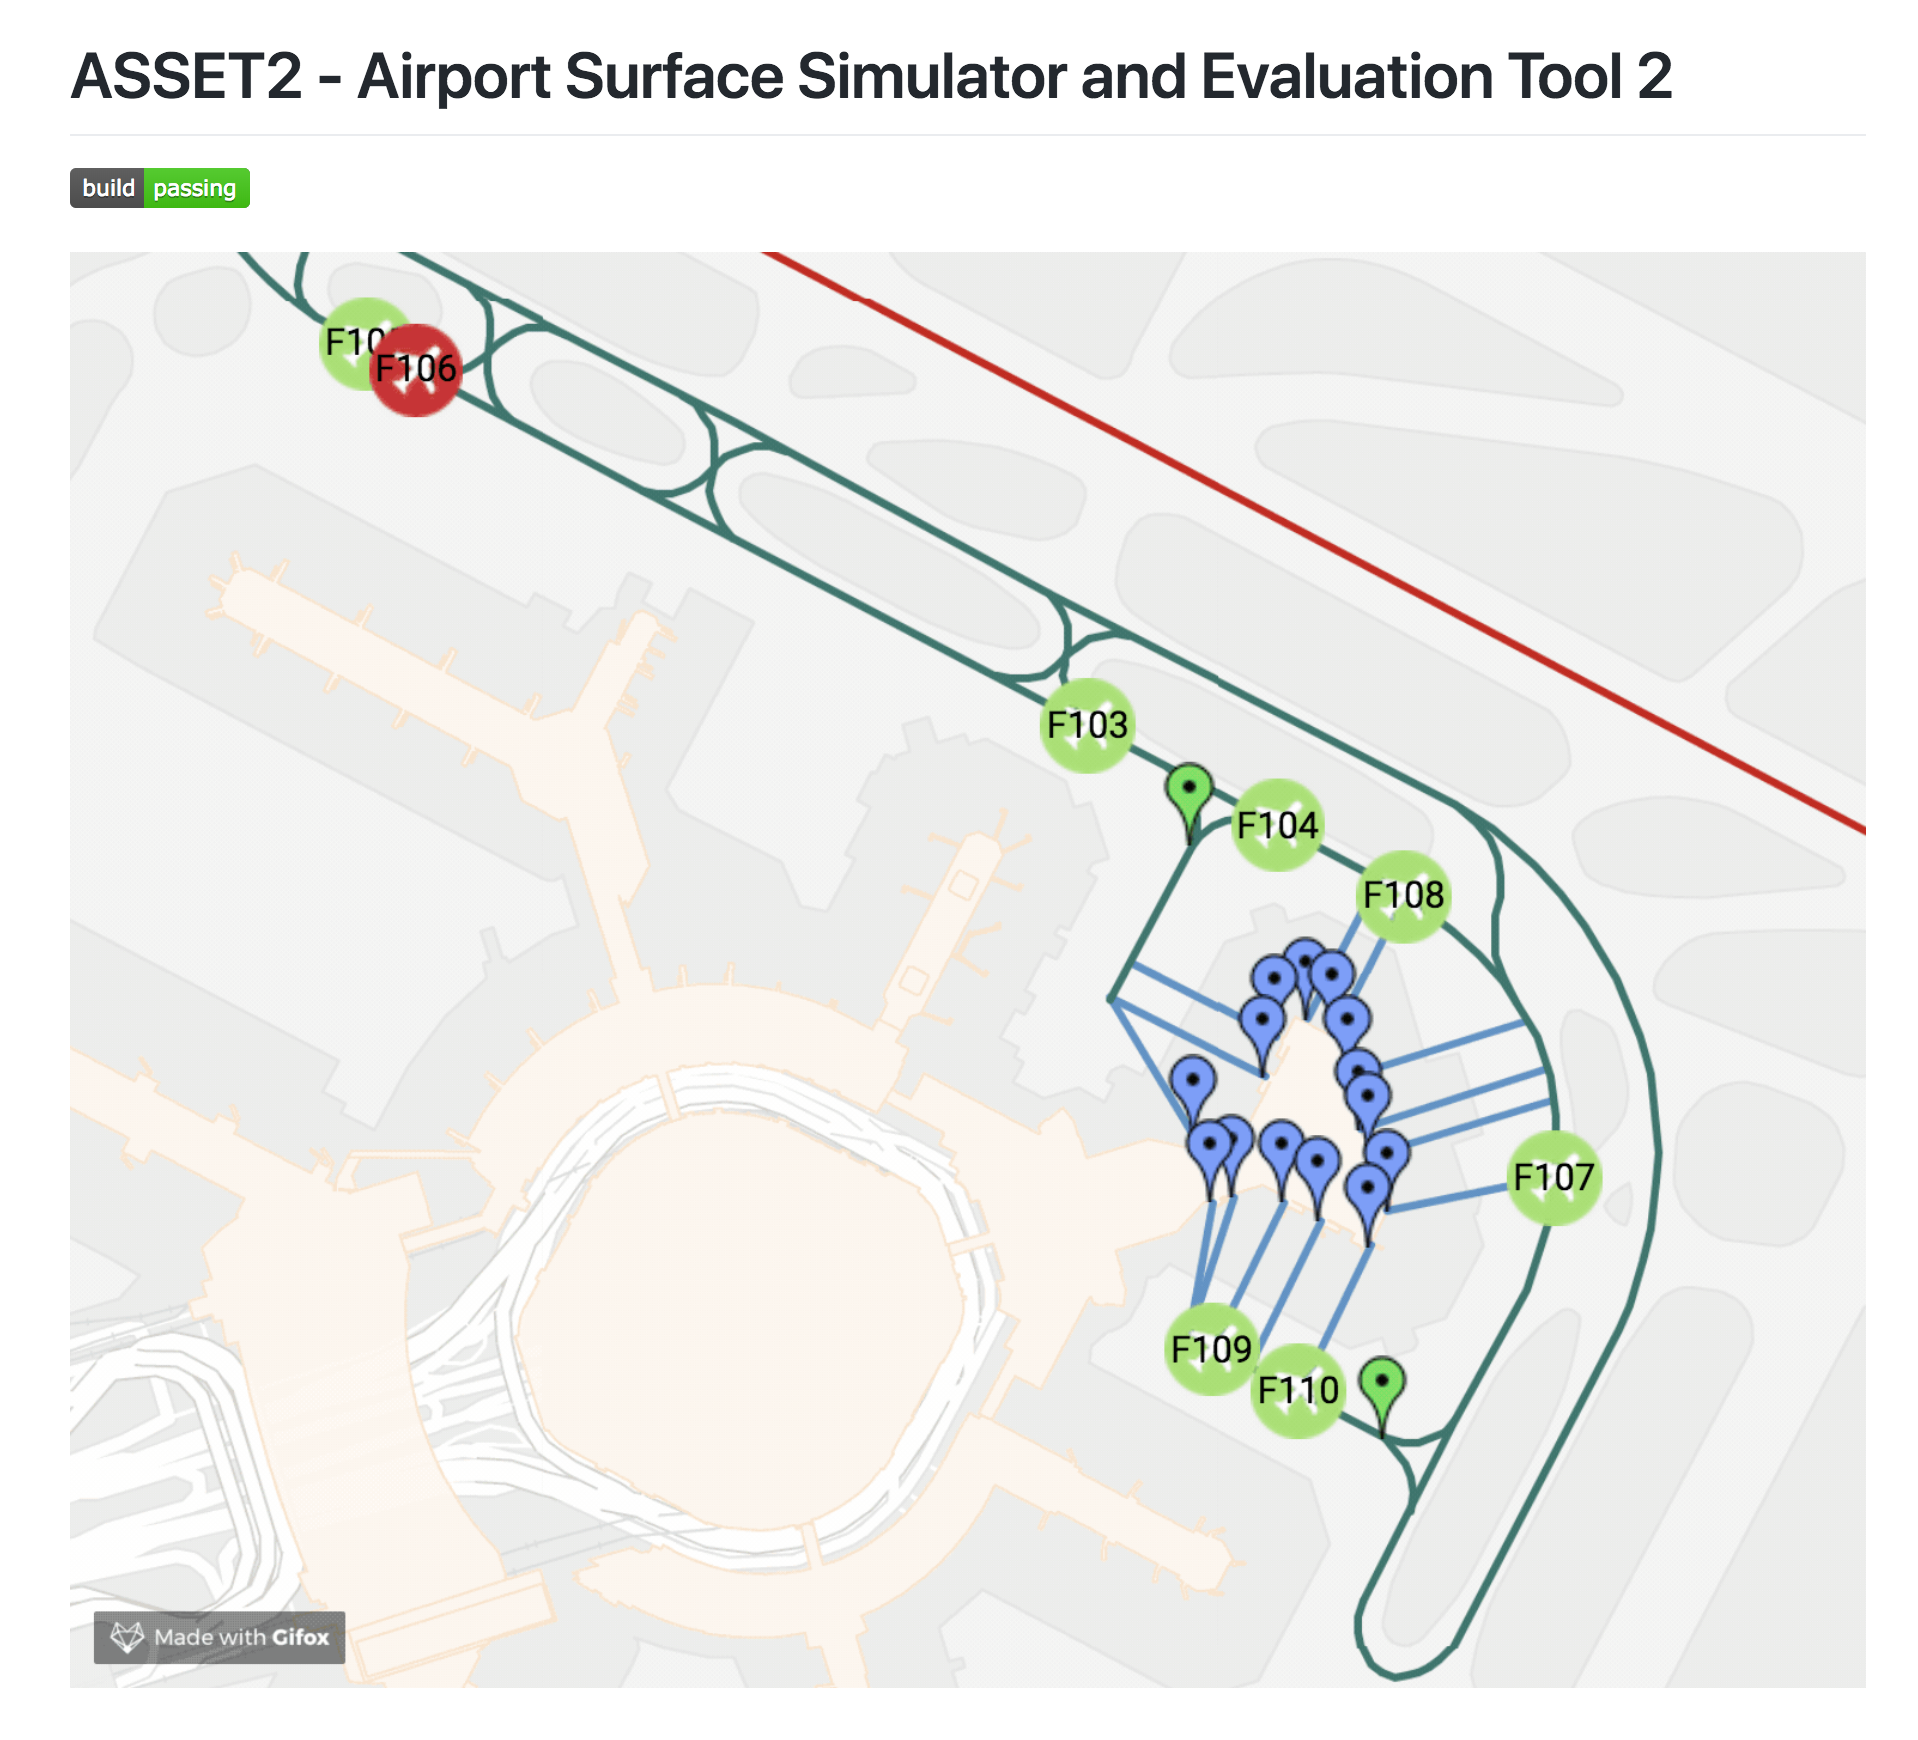 Visualization of the simulation tool